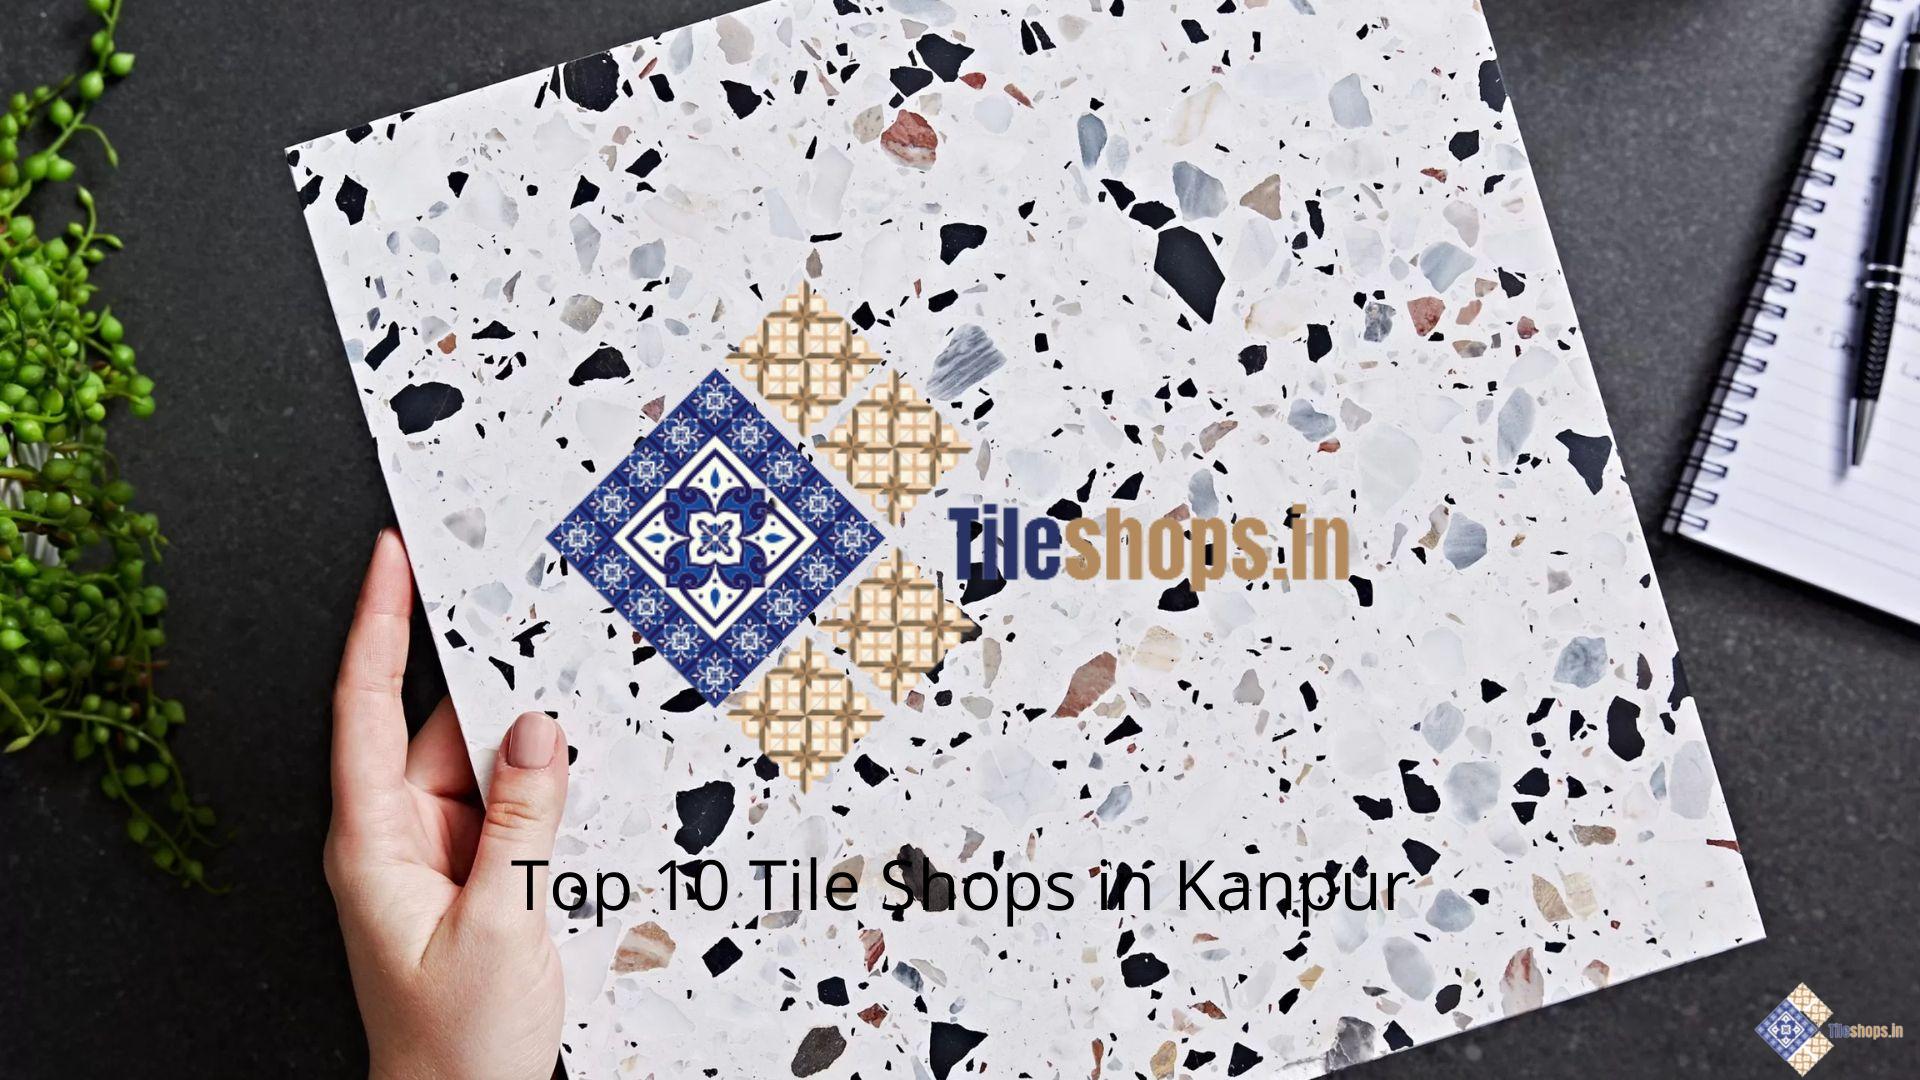 Top 10 Tile Shops in Kanpur